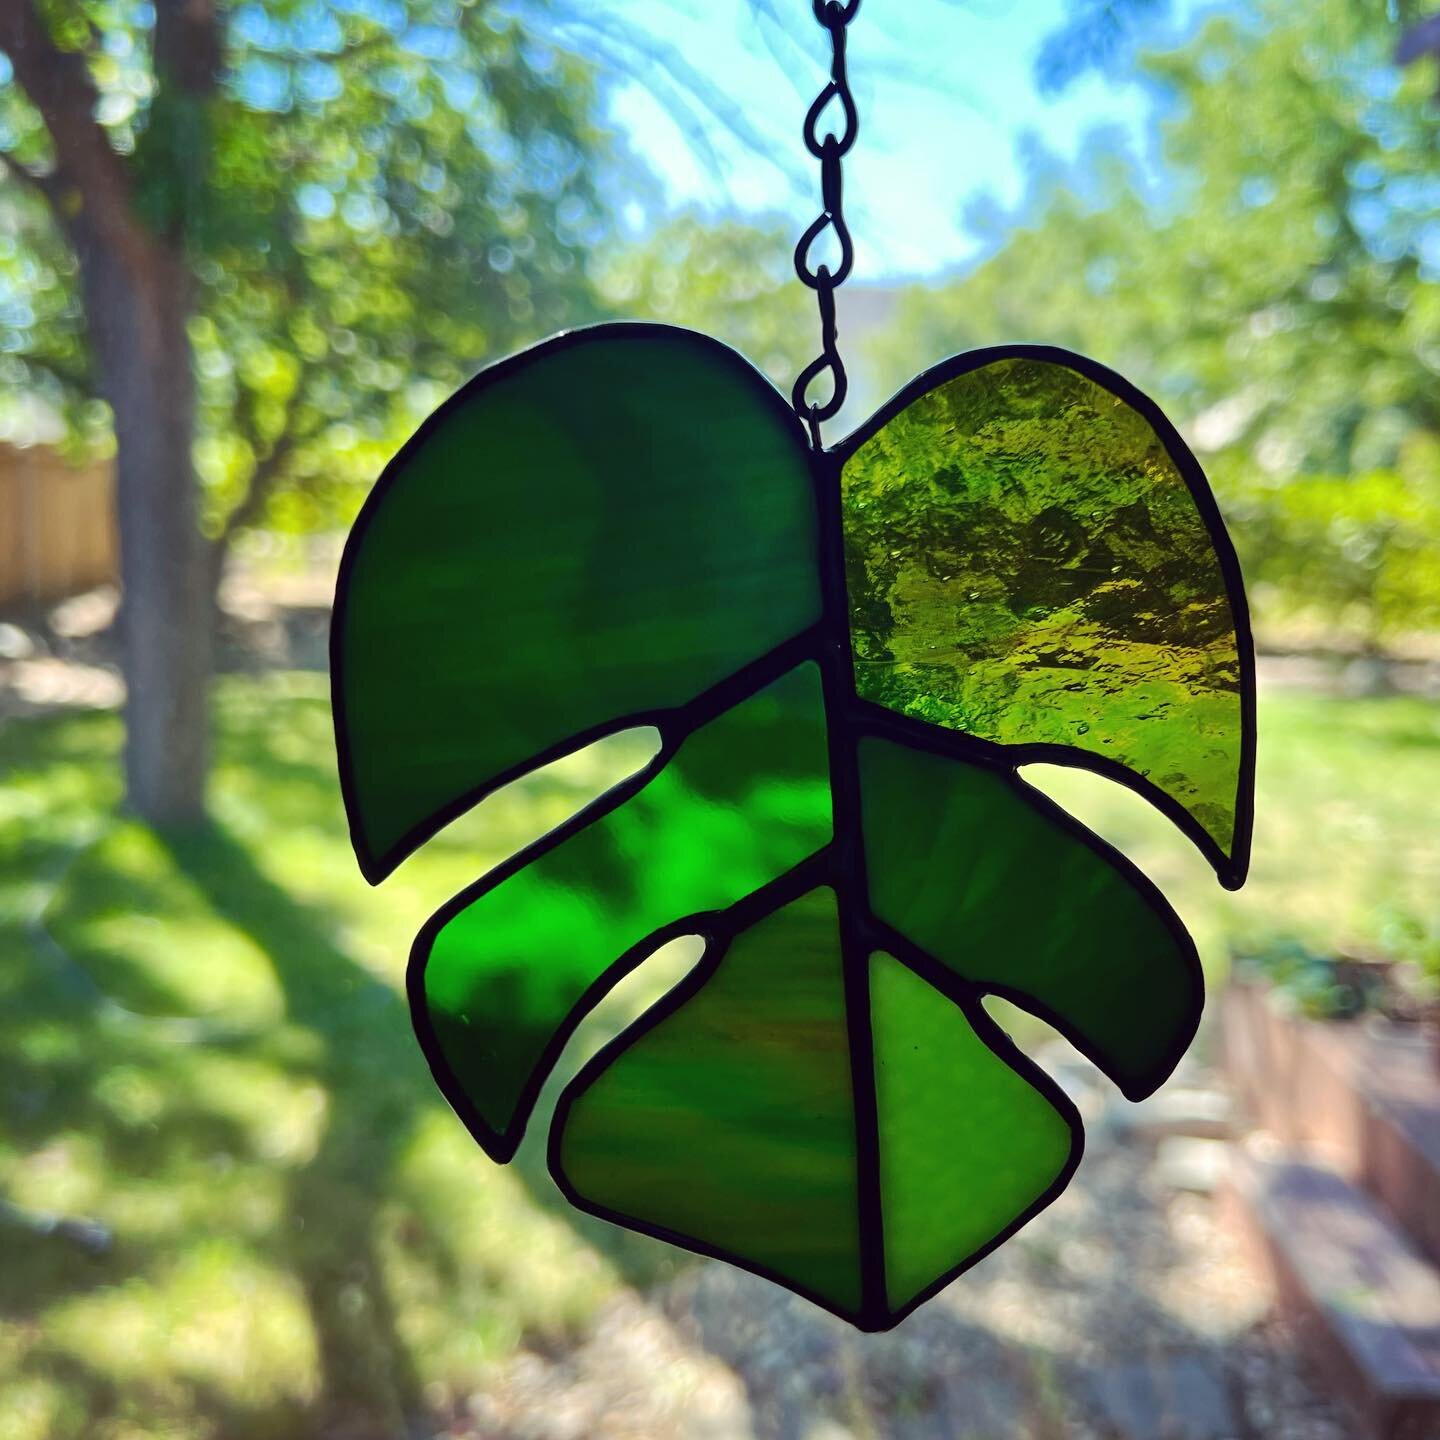 I&rsquo;m loving this bright and cheery stained glass leaf made by @cactusroseglassart 🌿 I got it at the @the.friendshop.boise pop up shop last weekend hosted by @greenacresboise ! What a treat it was to meet some local artists and crafters - it&rsq